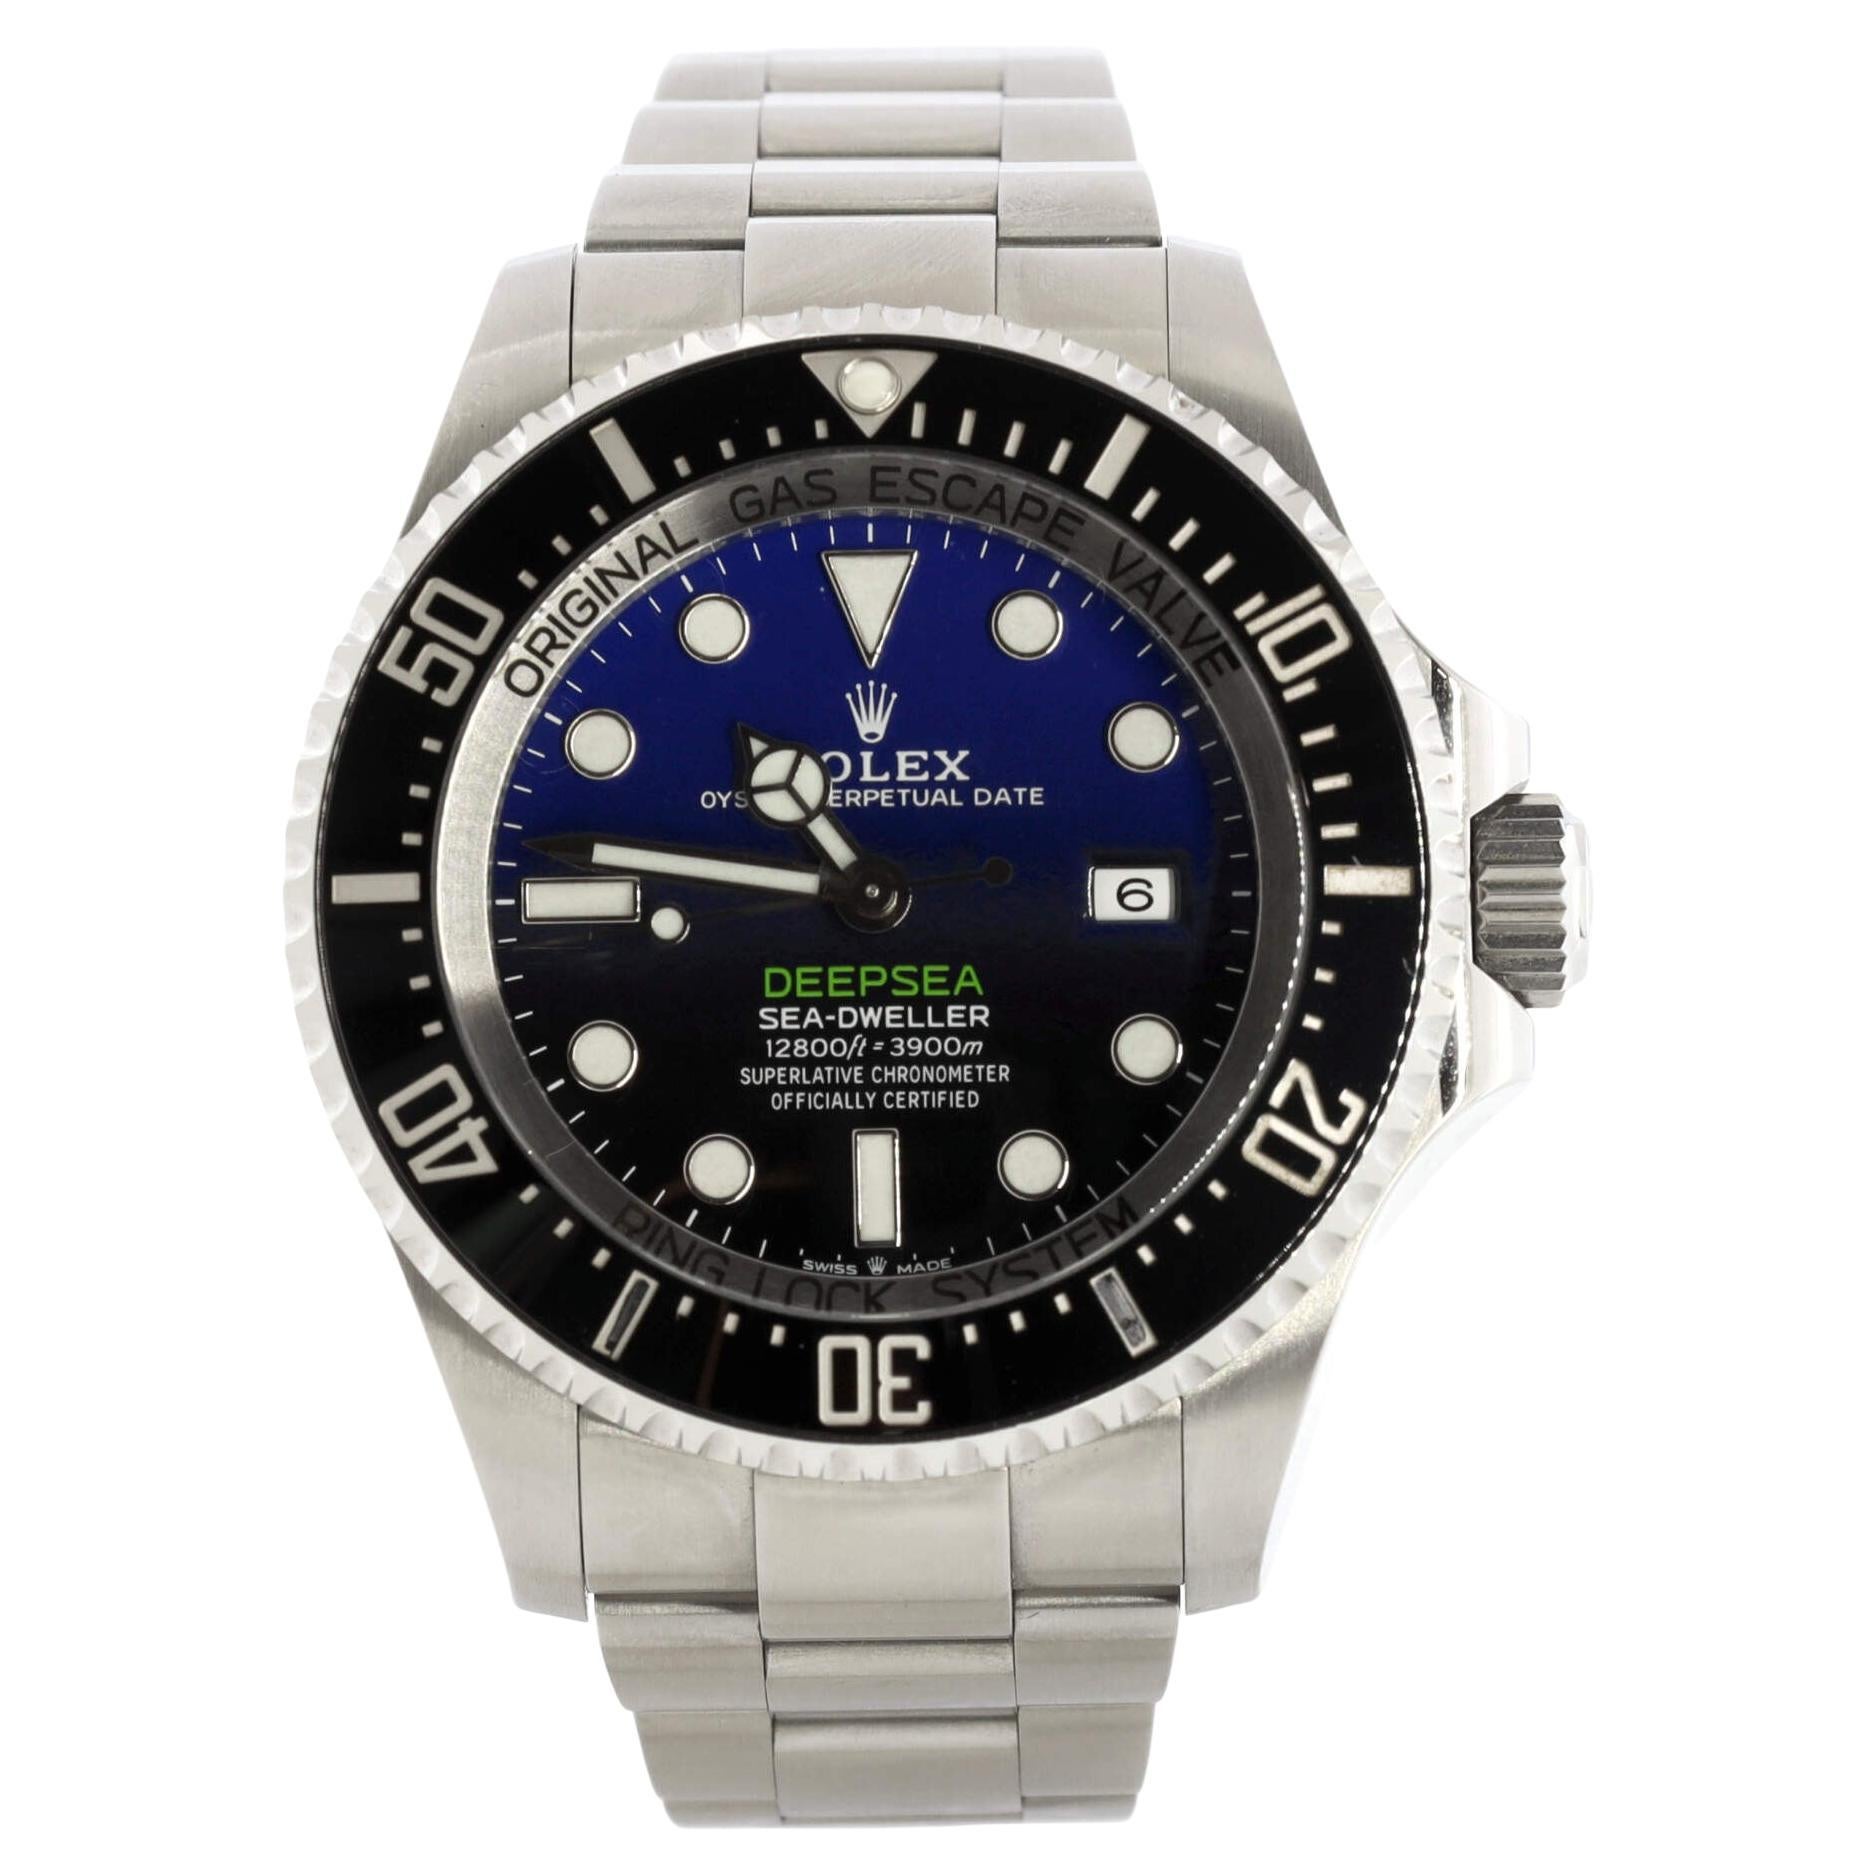 Rolex Oyster Perpetual Deepsea Sea-Dweller James Cameron Automatic Watch For Sale